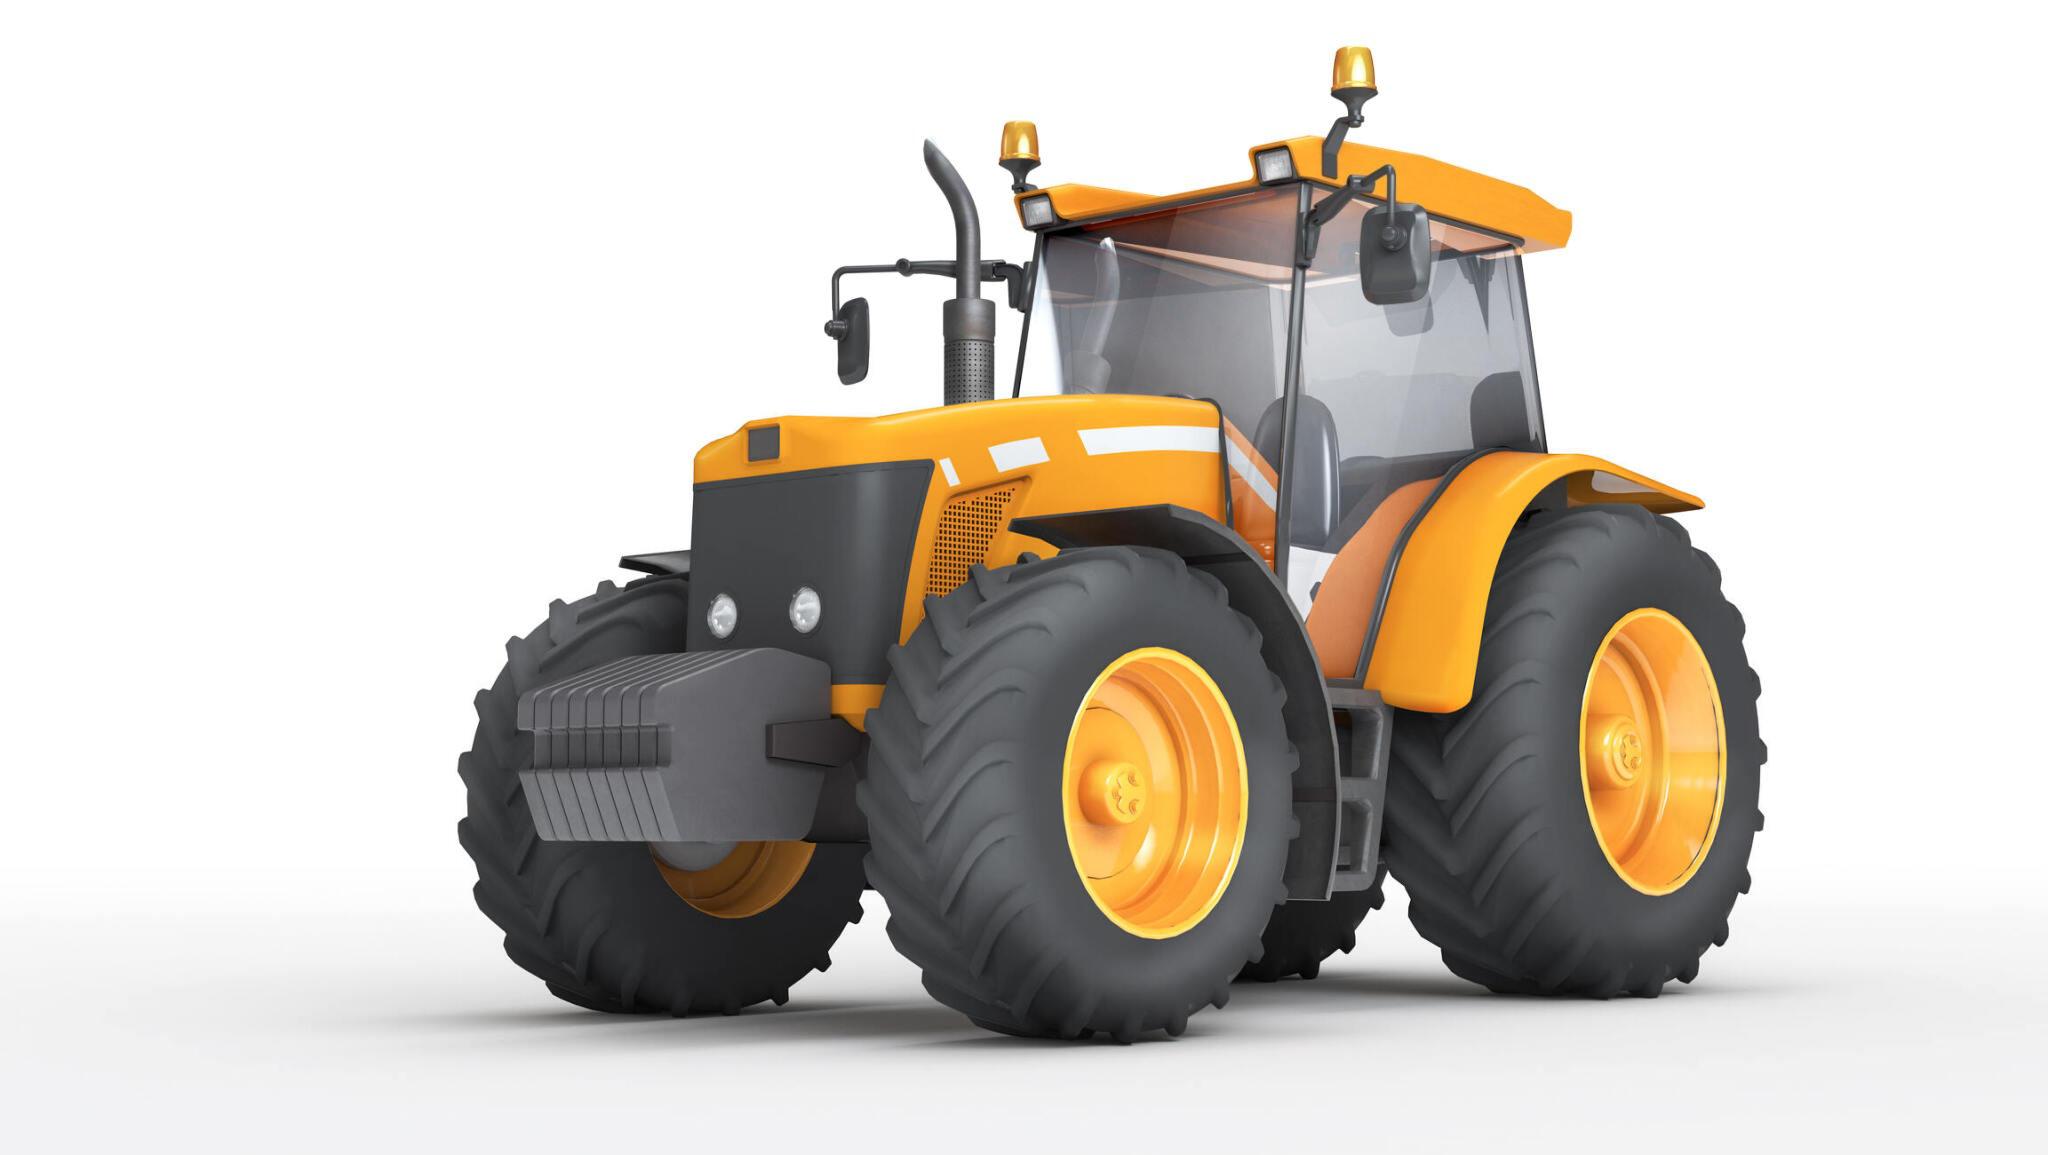 How to drive a Kubota tractor